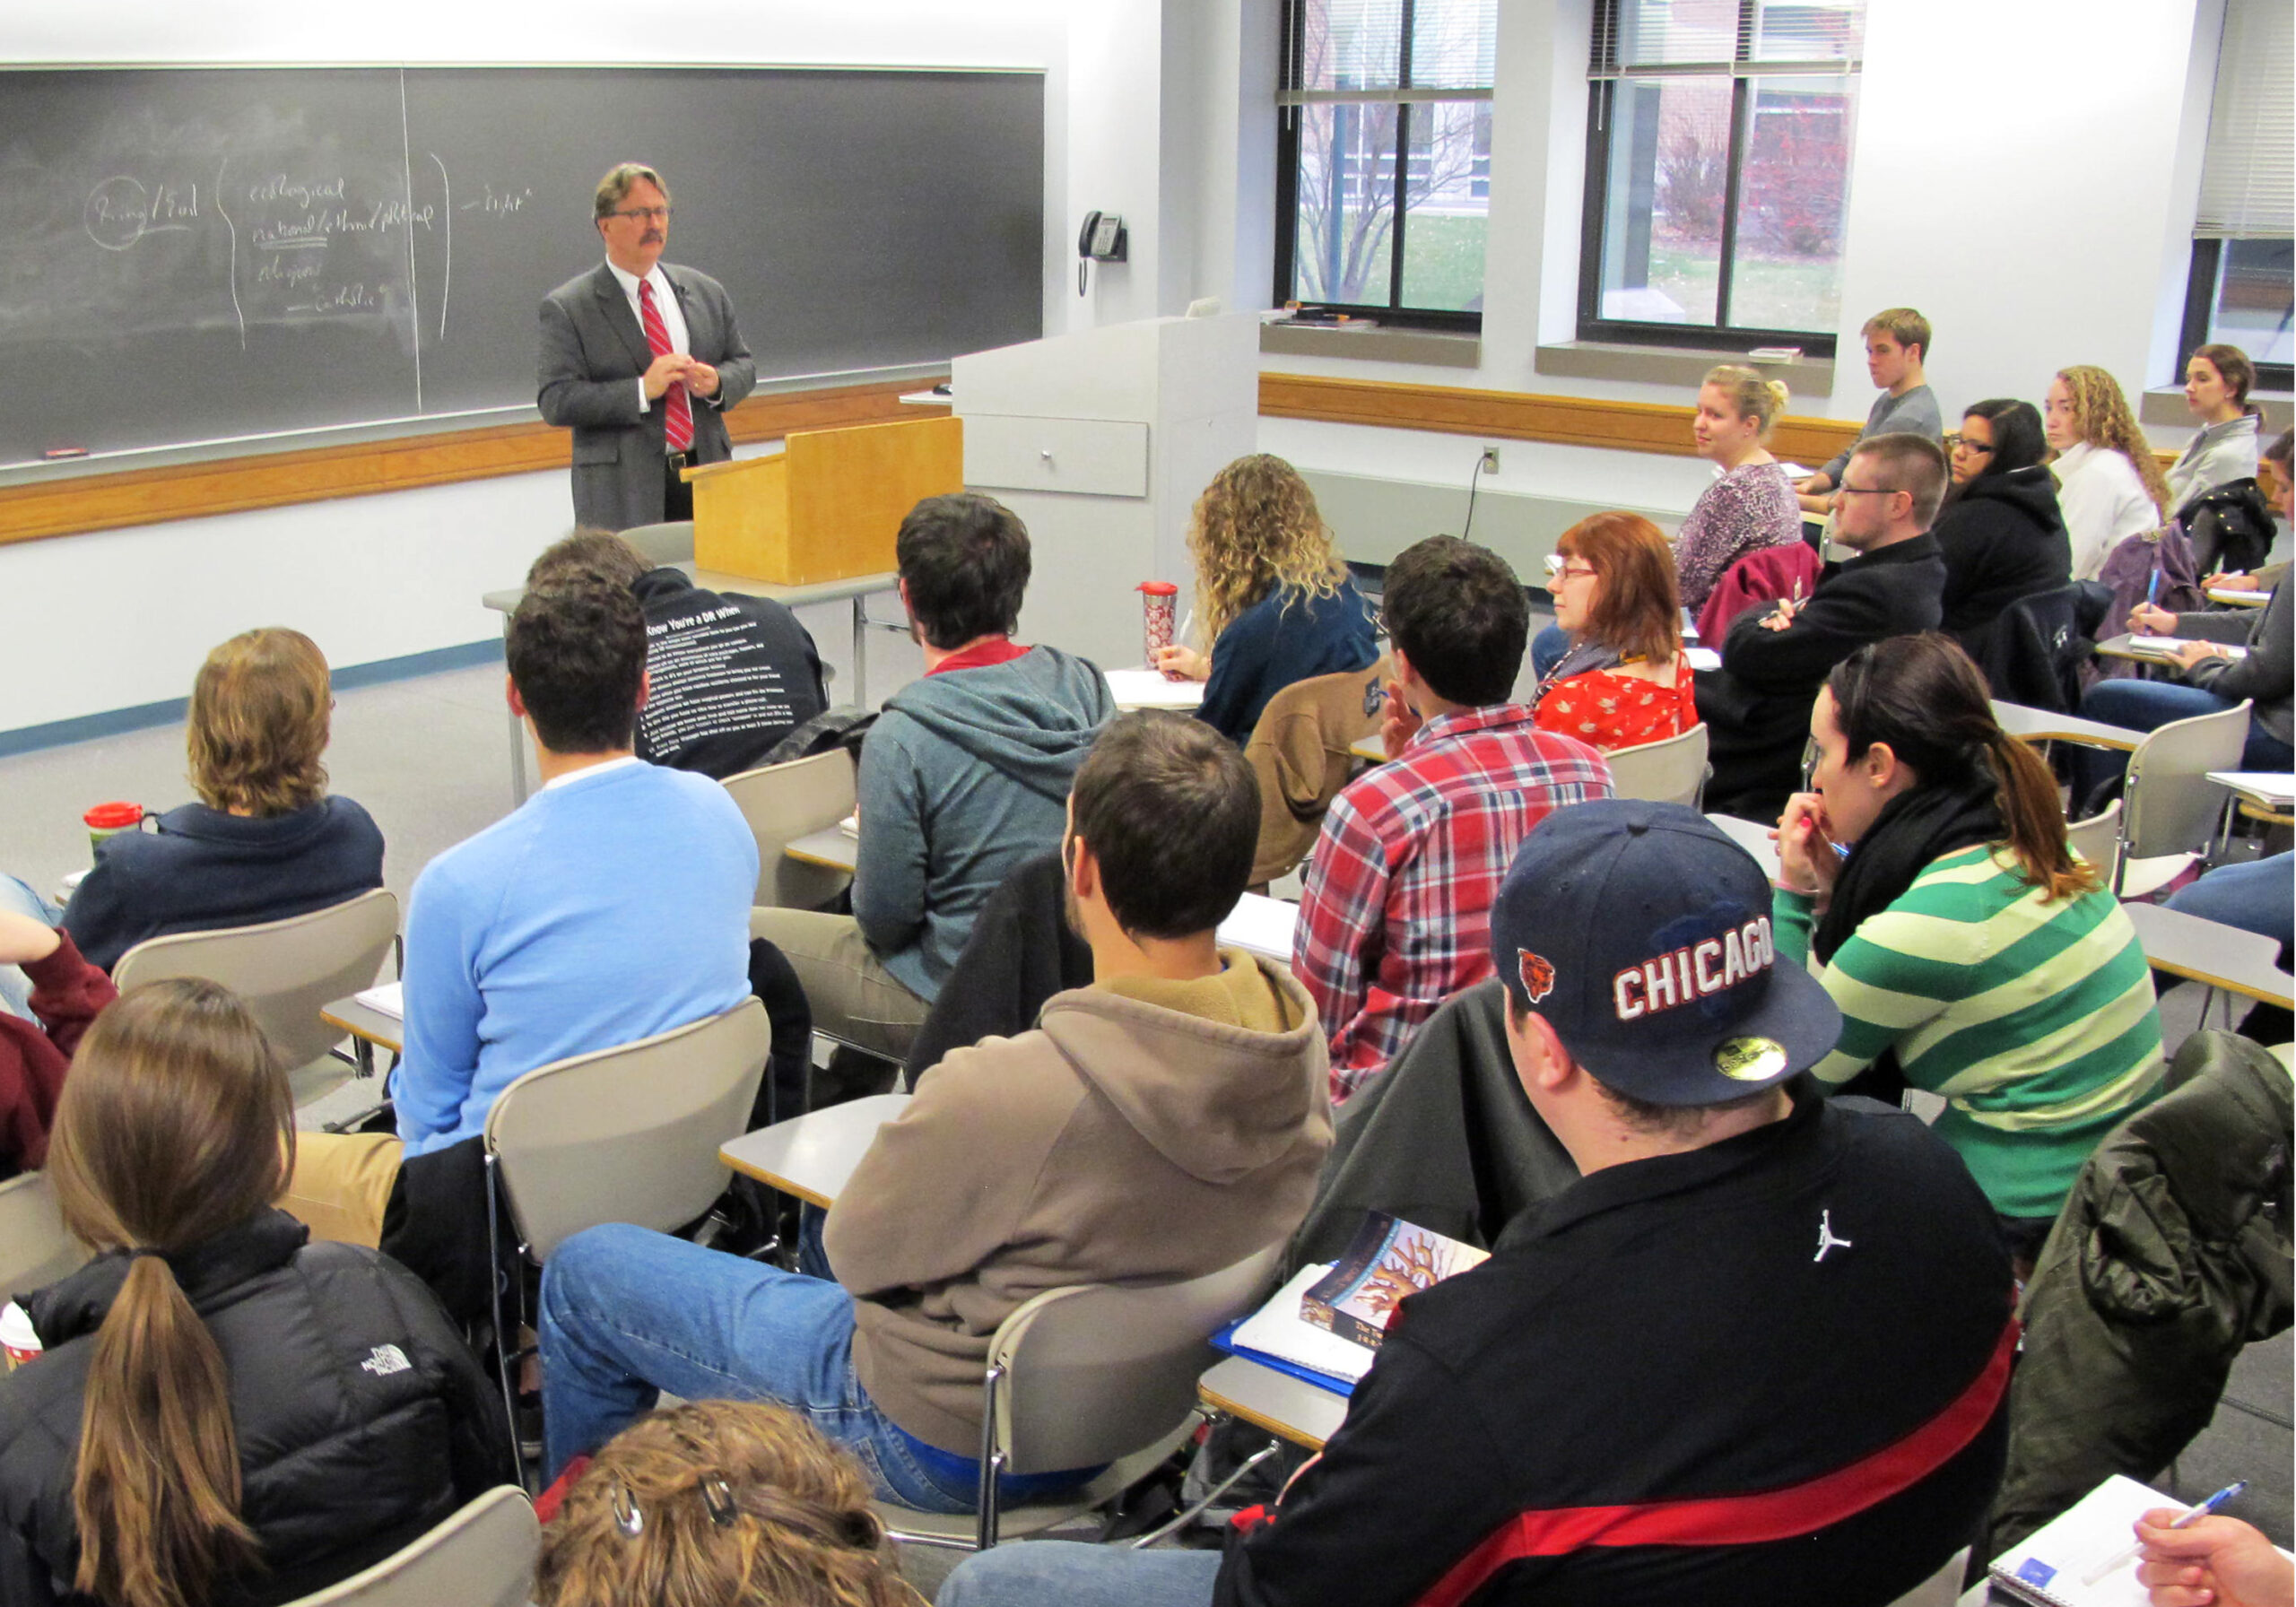 A Marquette University professor lectures to a filled classroom